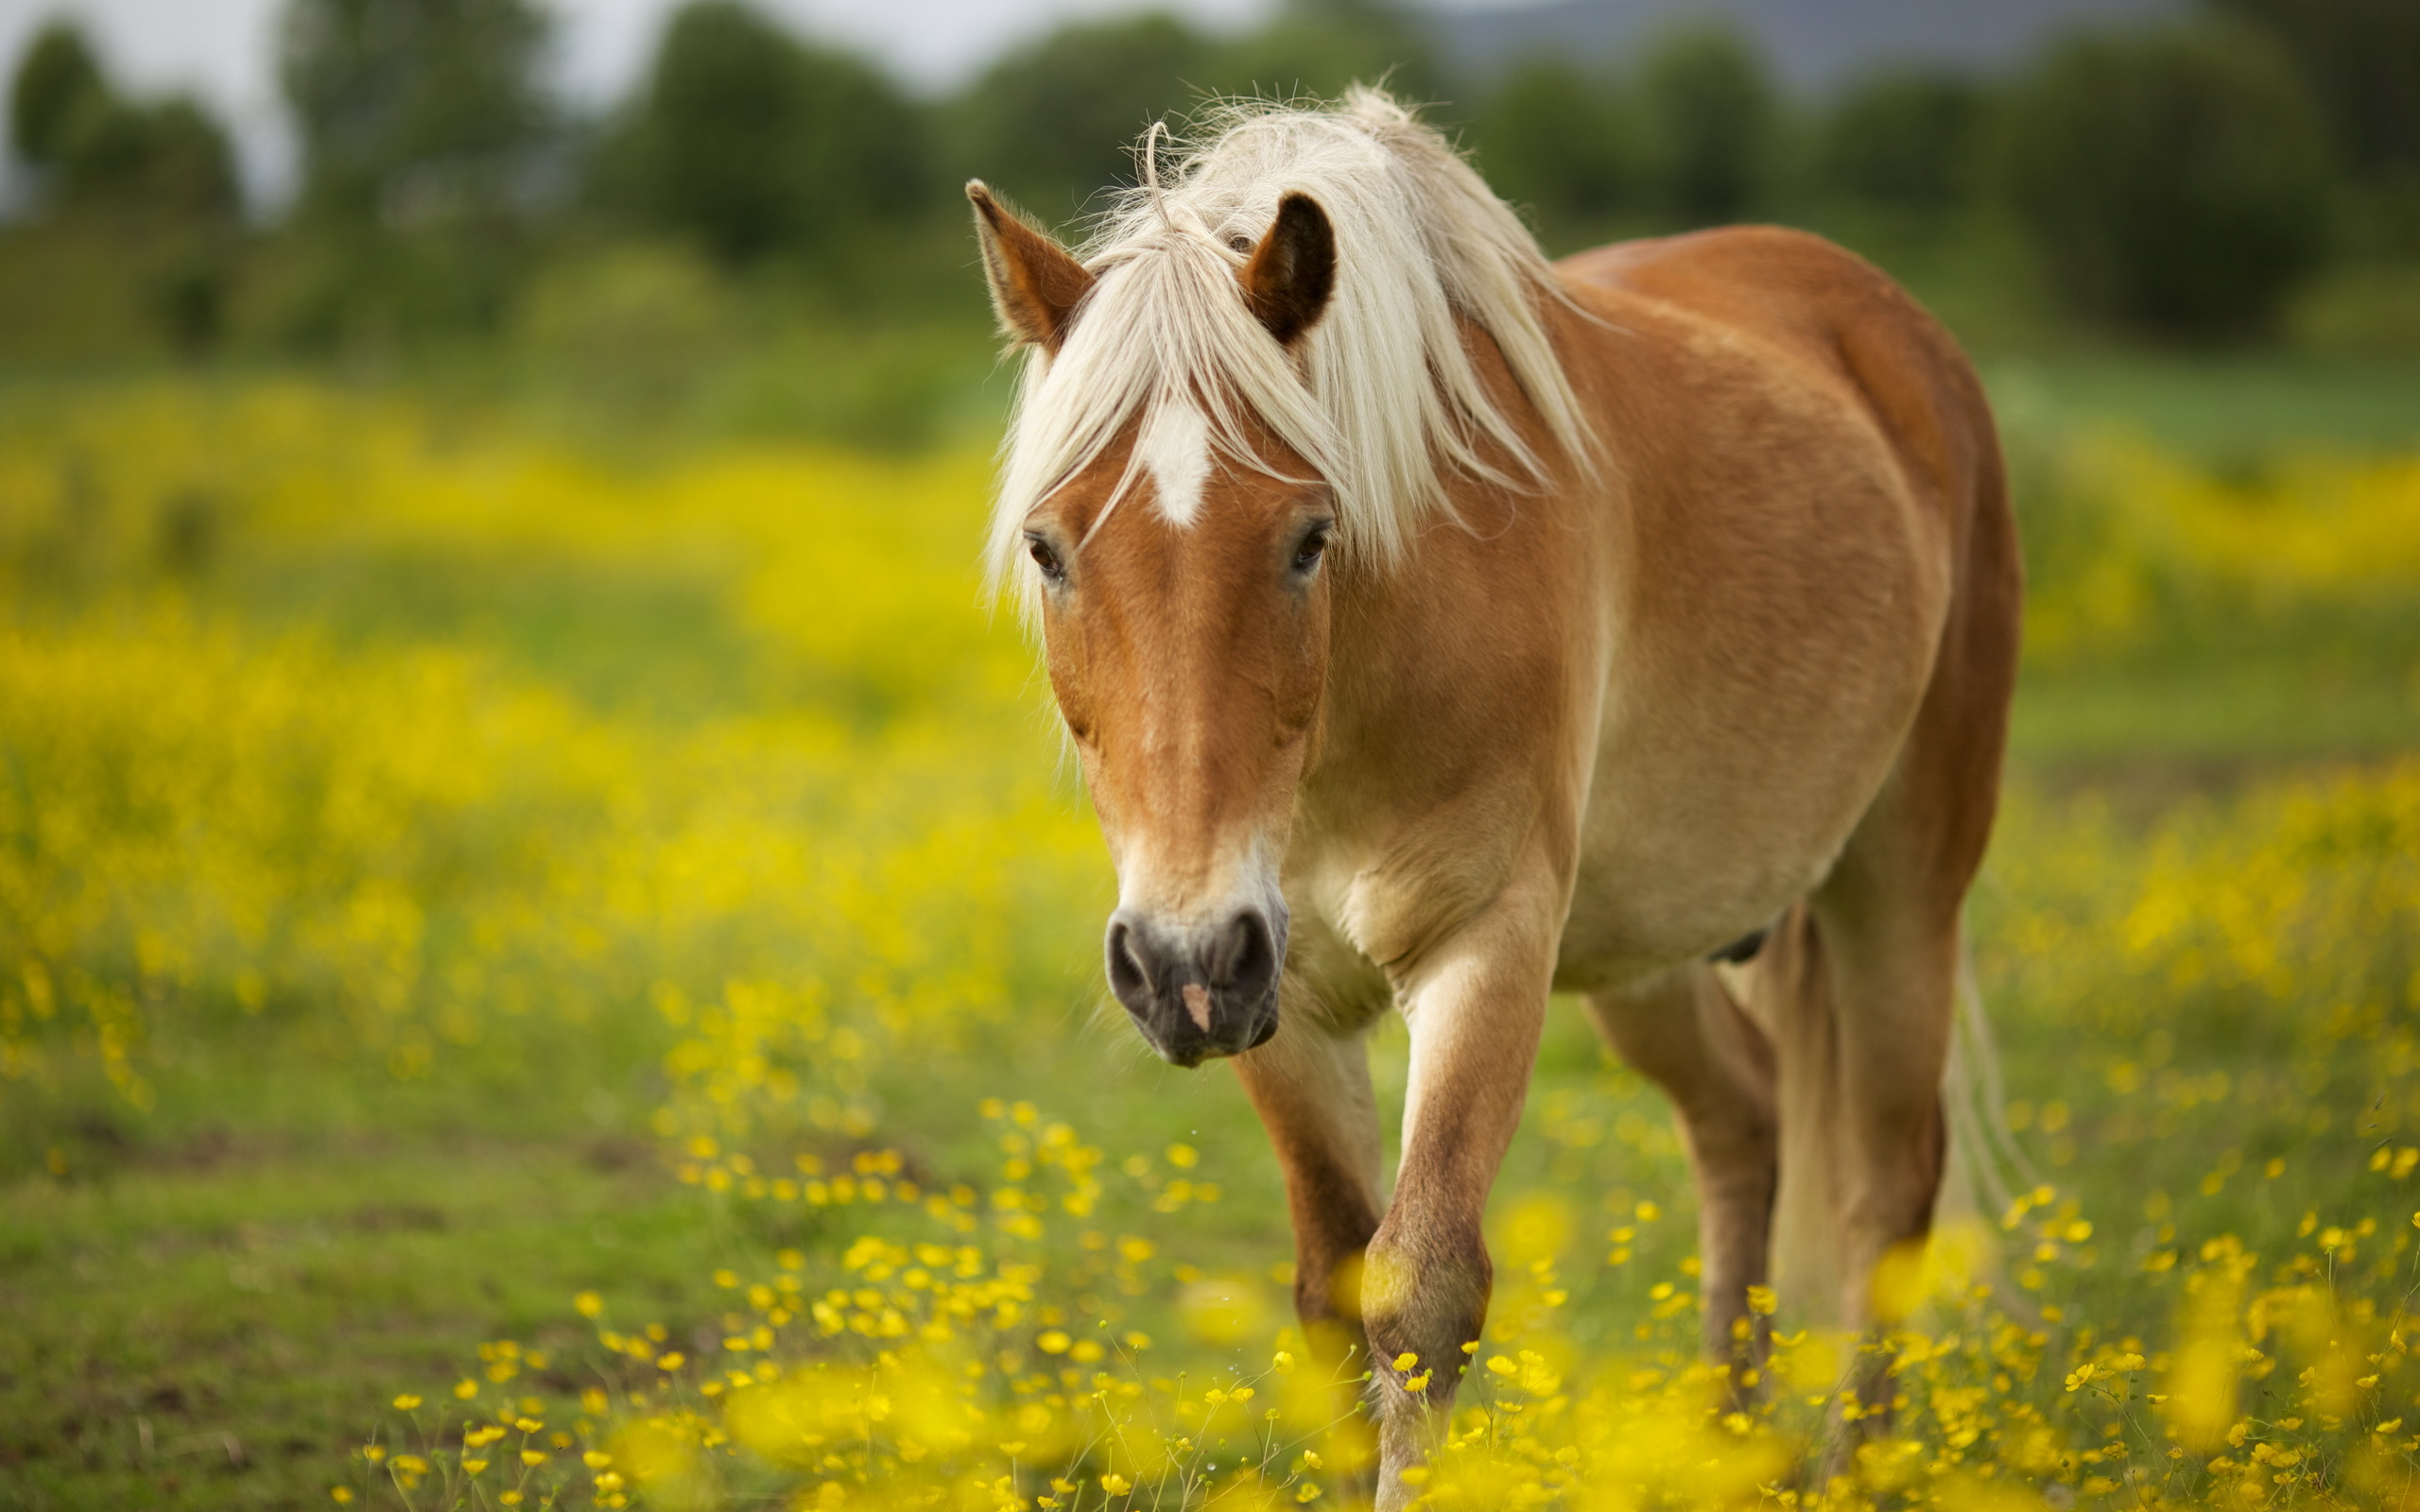 Horse Wallpaper Android Phones